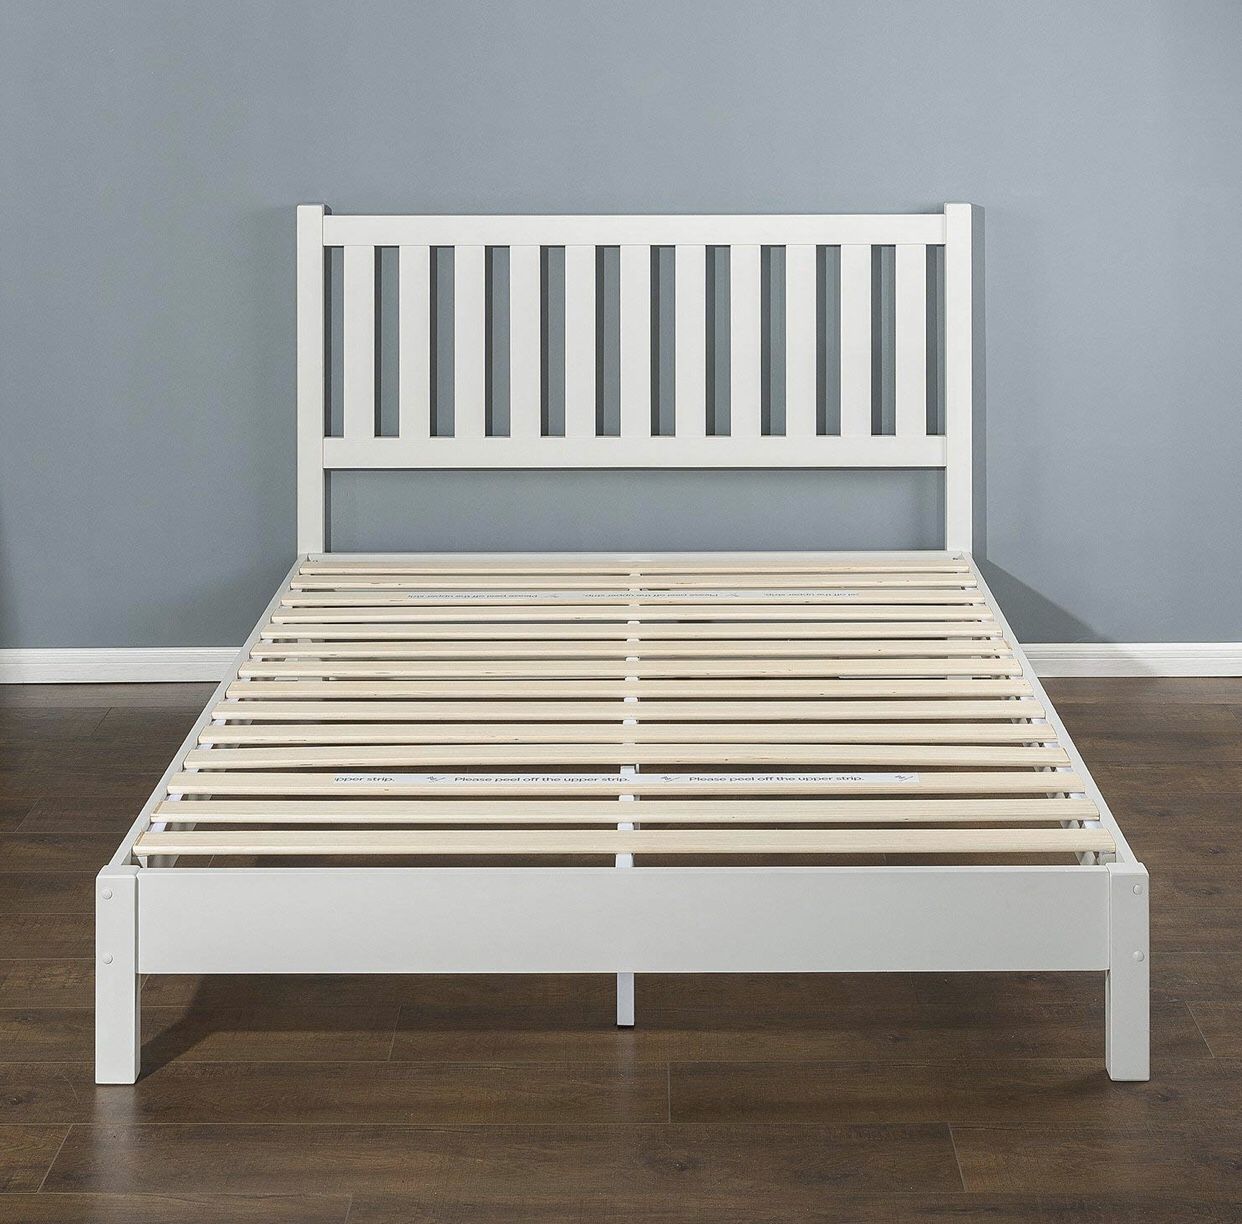 New wood KING ZINUS bed frame